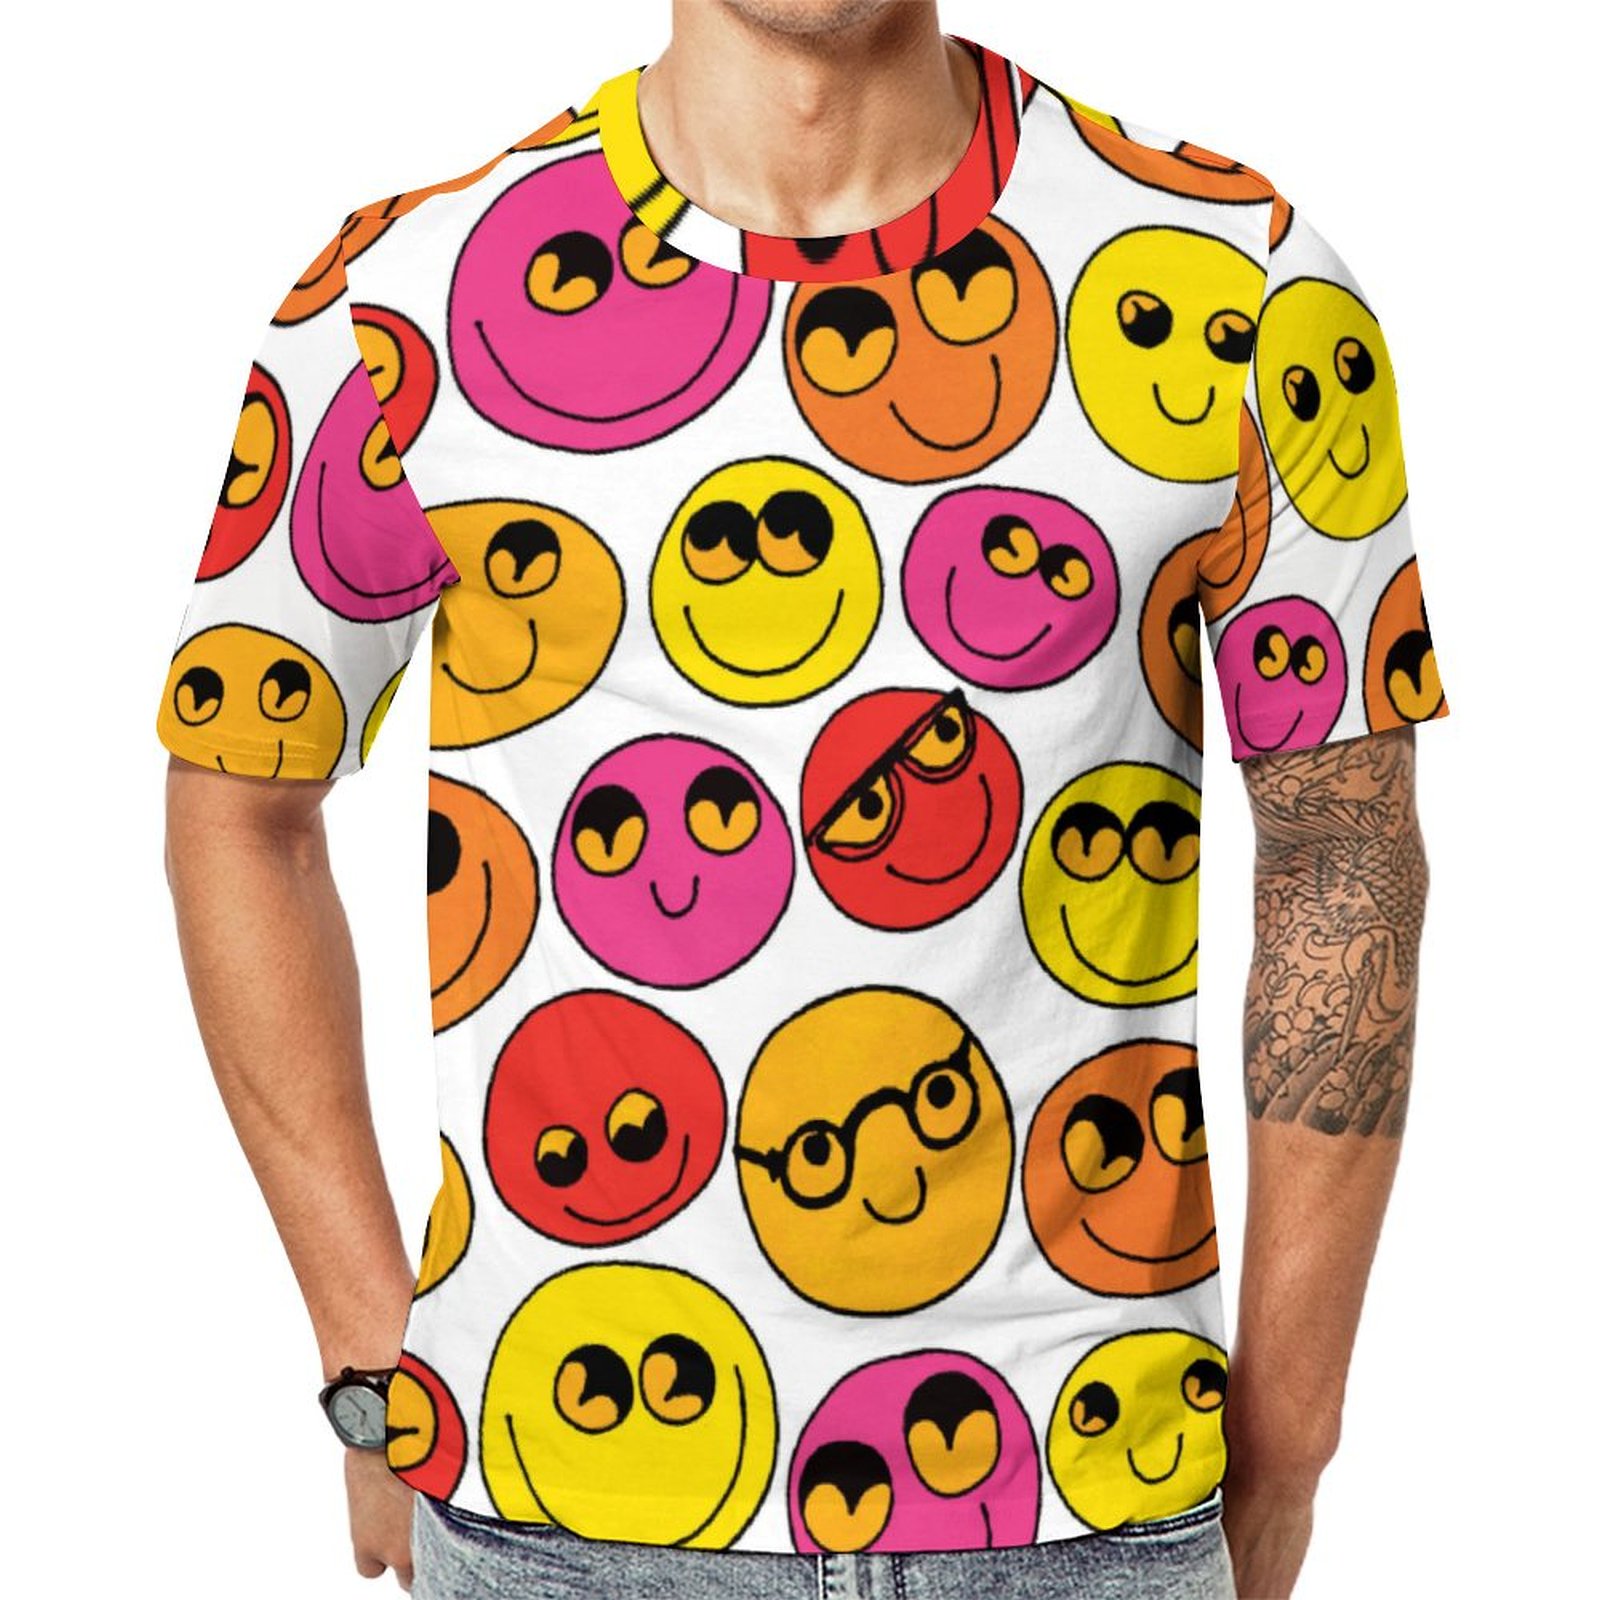 Funny Emoji Faces Pink Yellow Cute Short Sleeve Print Unisex Tshirt Summer Casual Tees for Men and Women Coolcoshirts